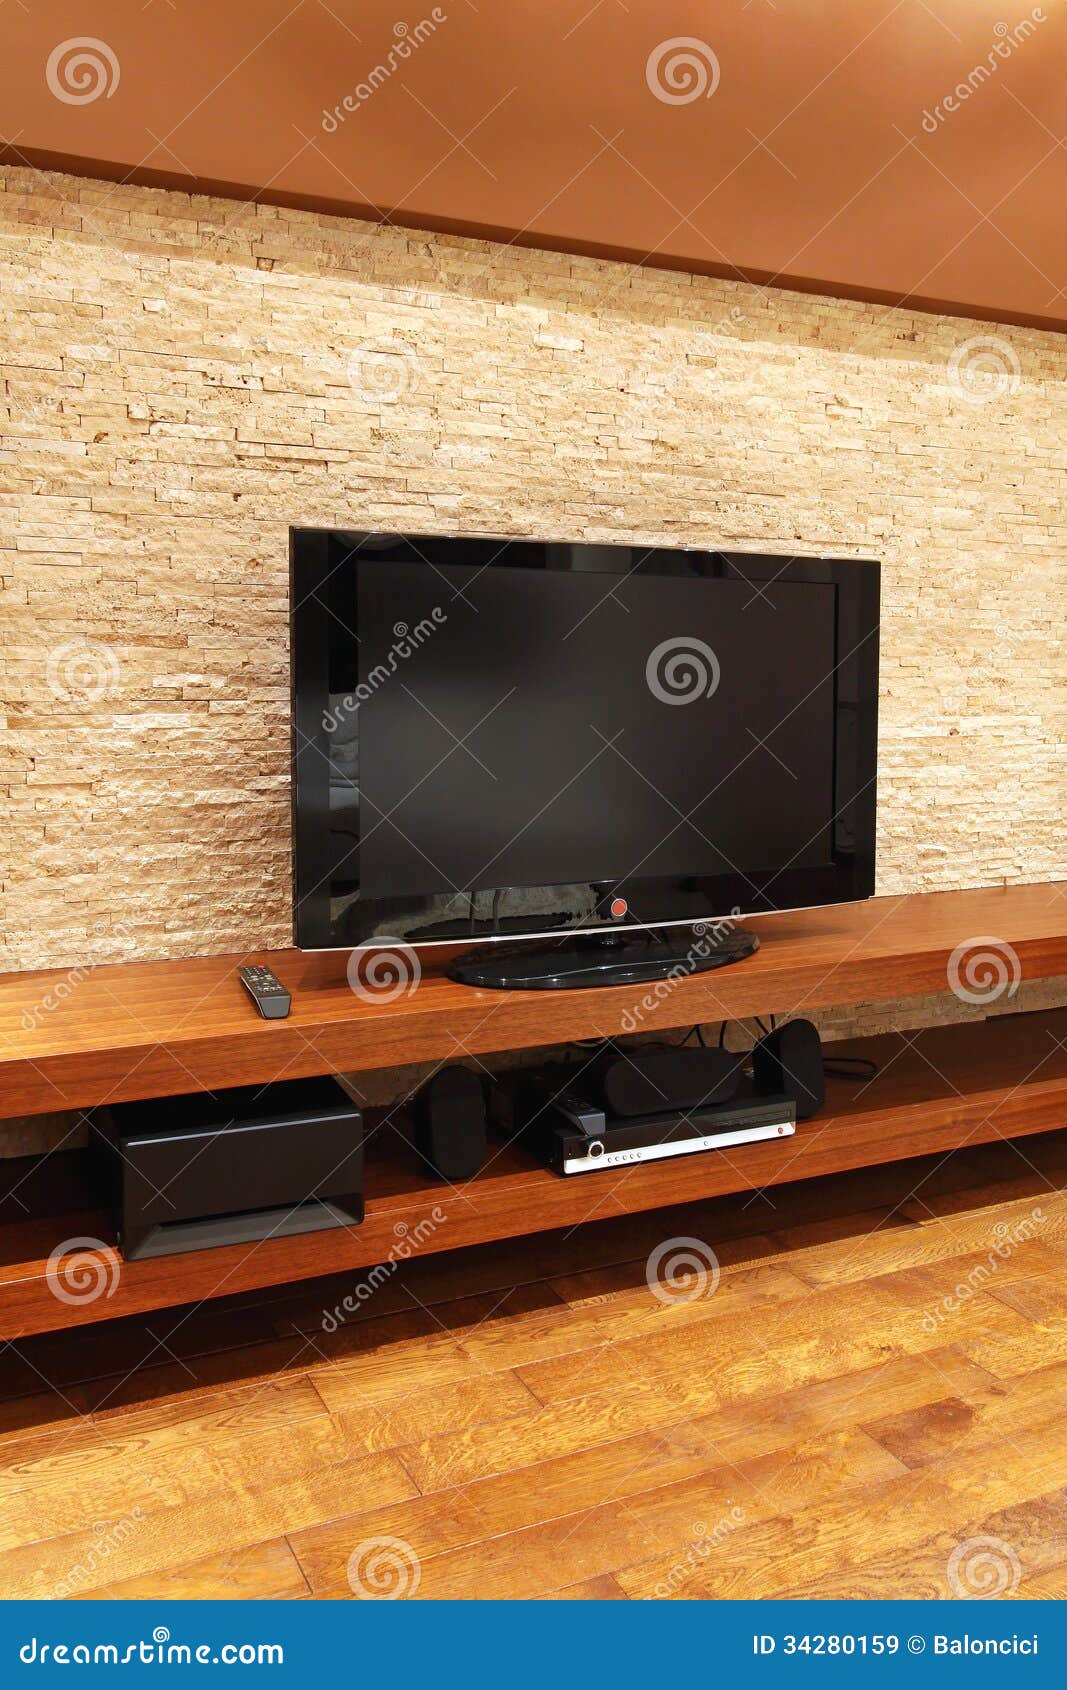 Floating TV Stand Royalty Free Stock Images - Image: 34280159